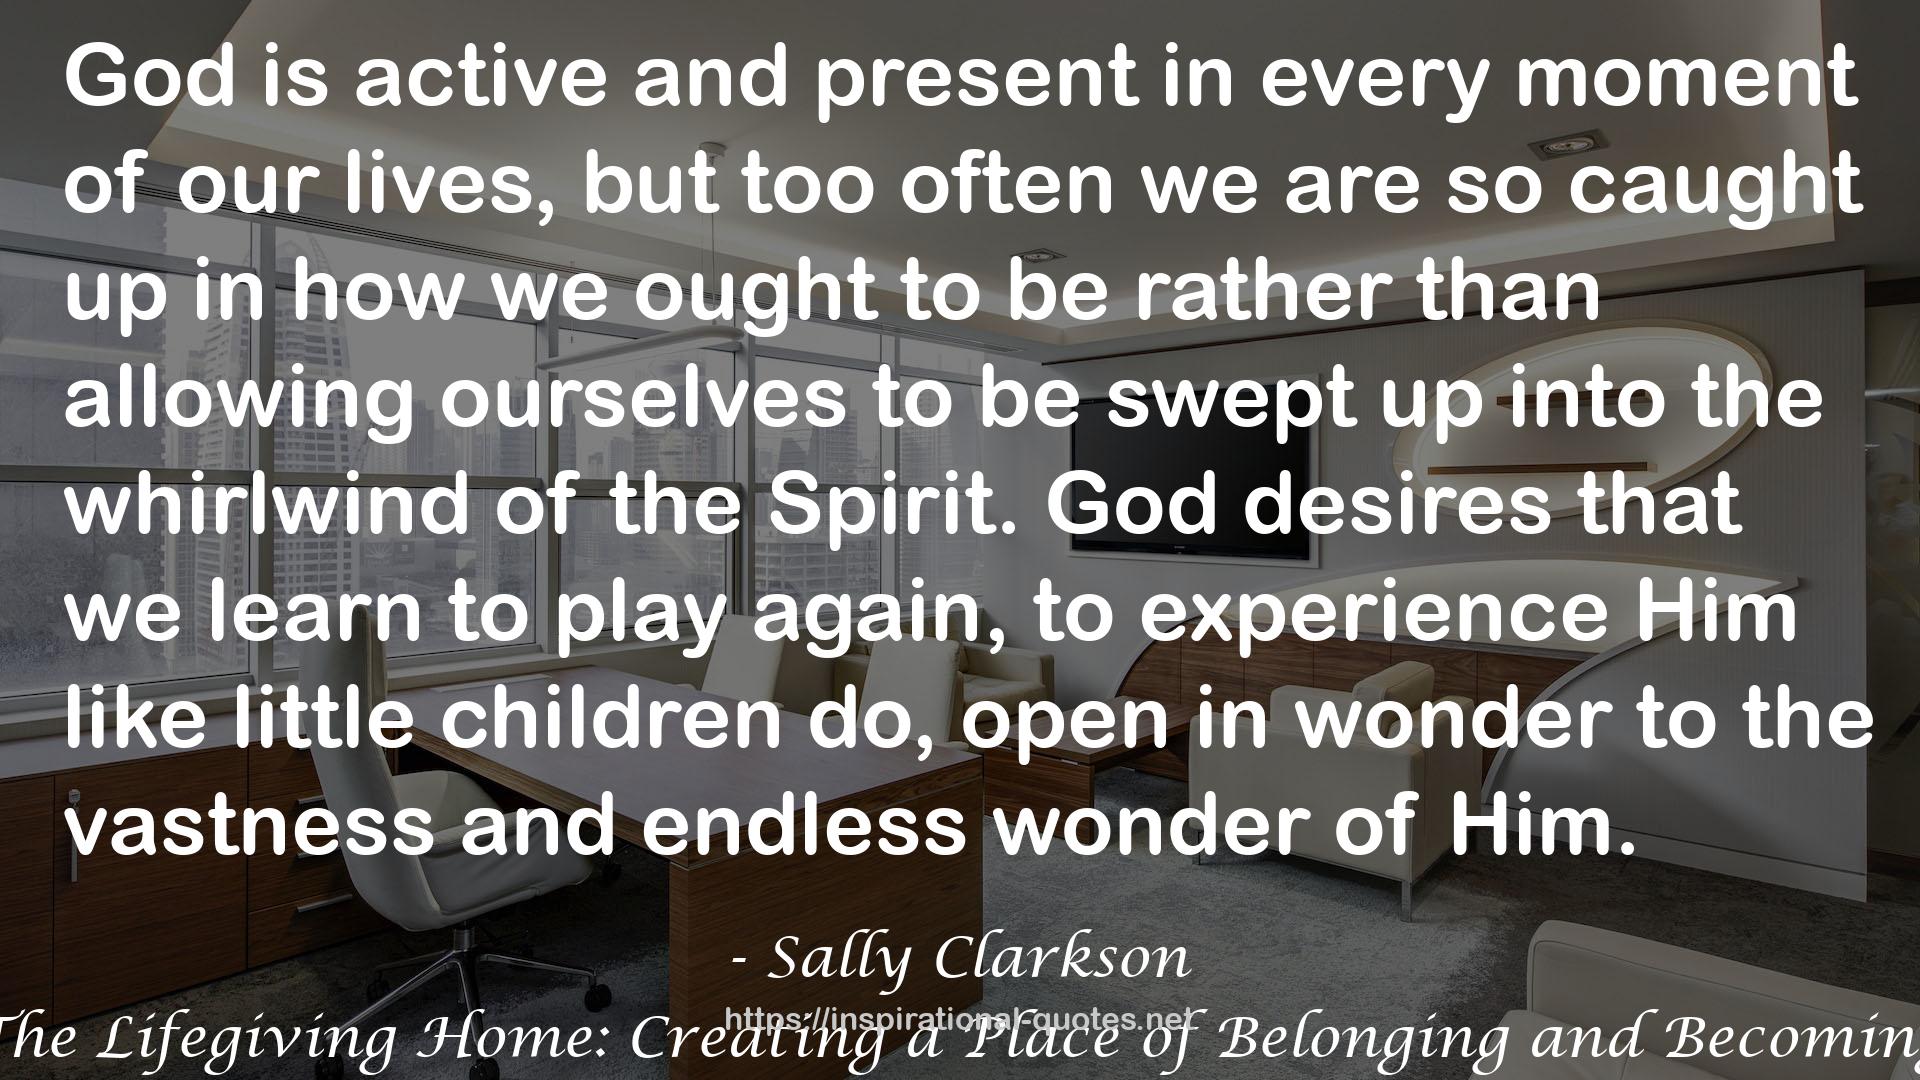 The Lifegiving Home: Creating a Place of Belonging and Becoming QUOTES